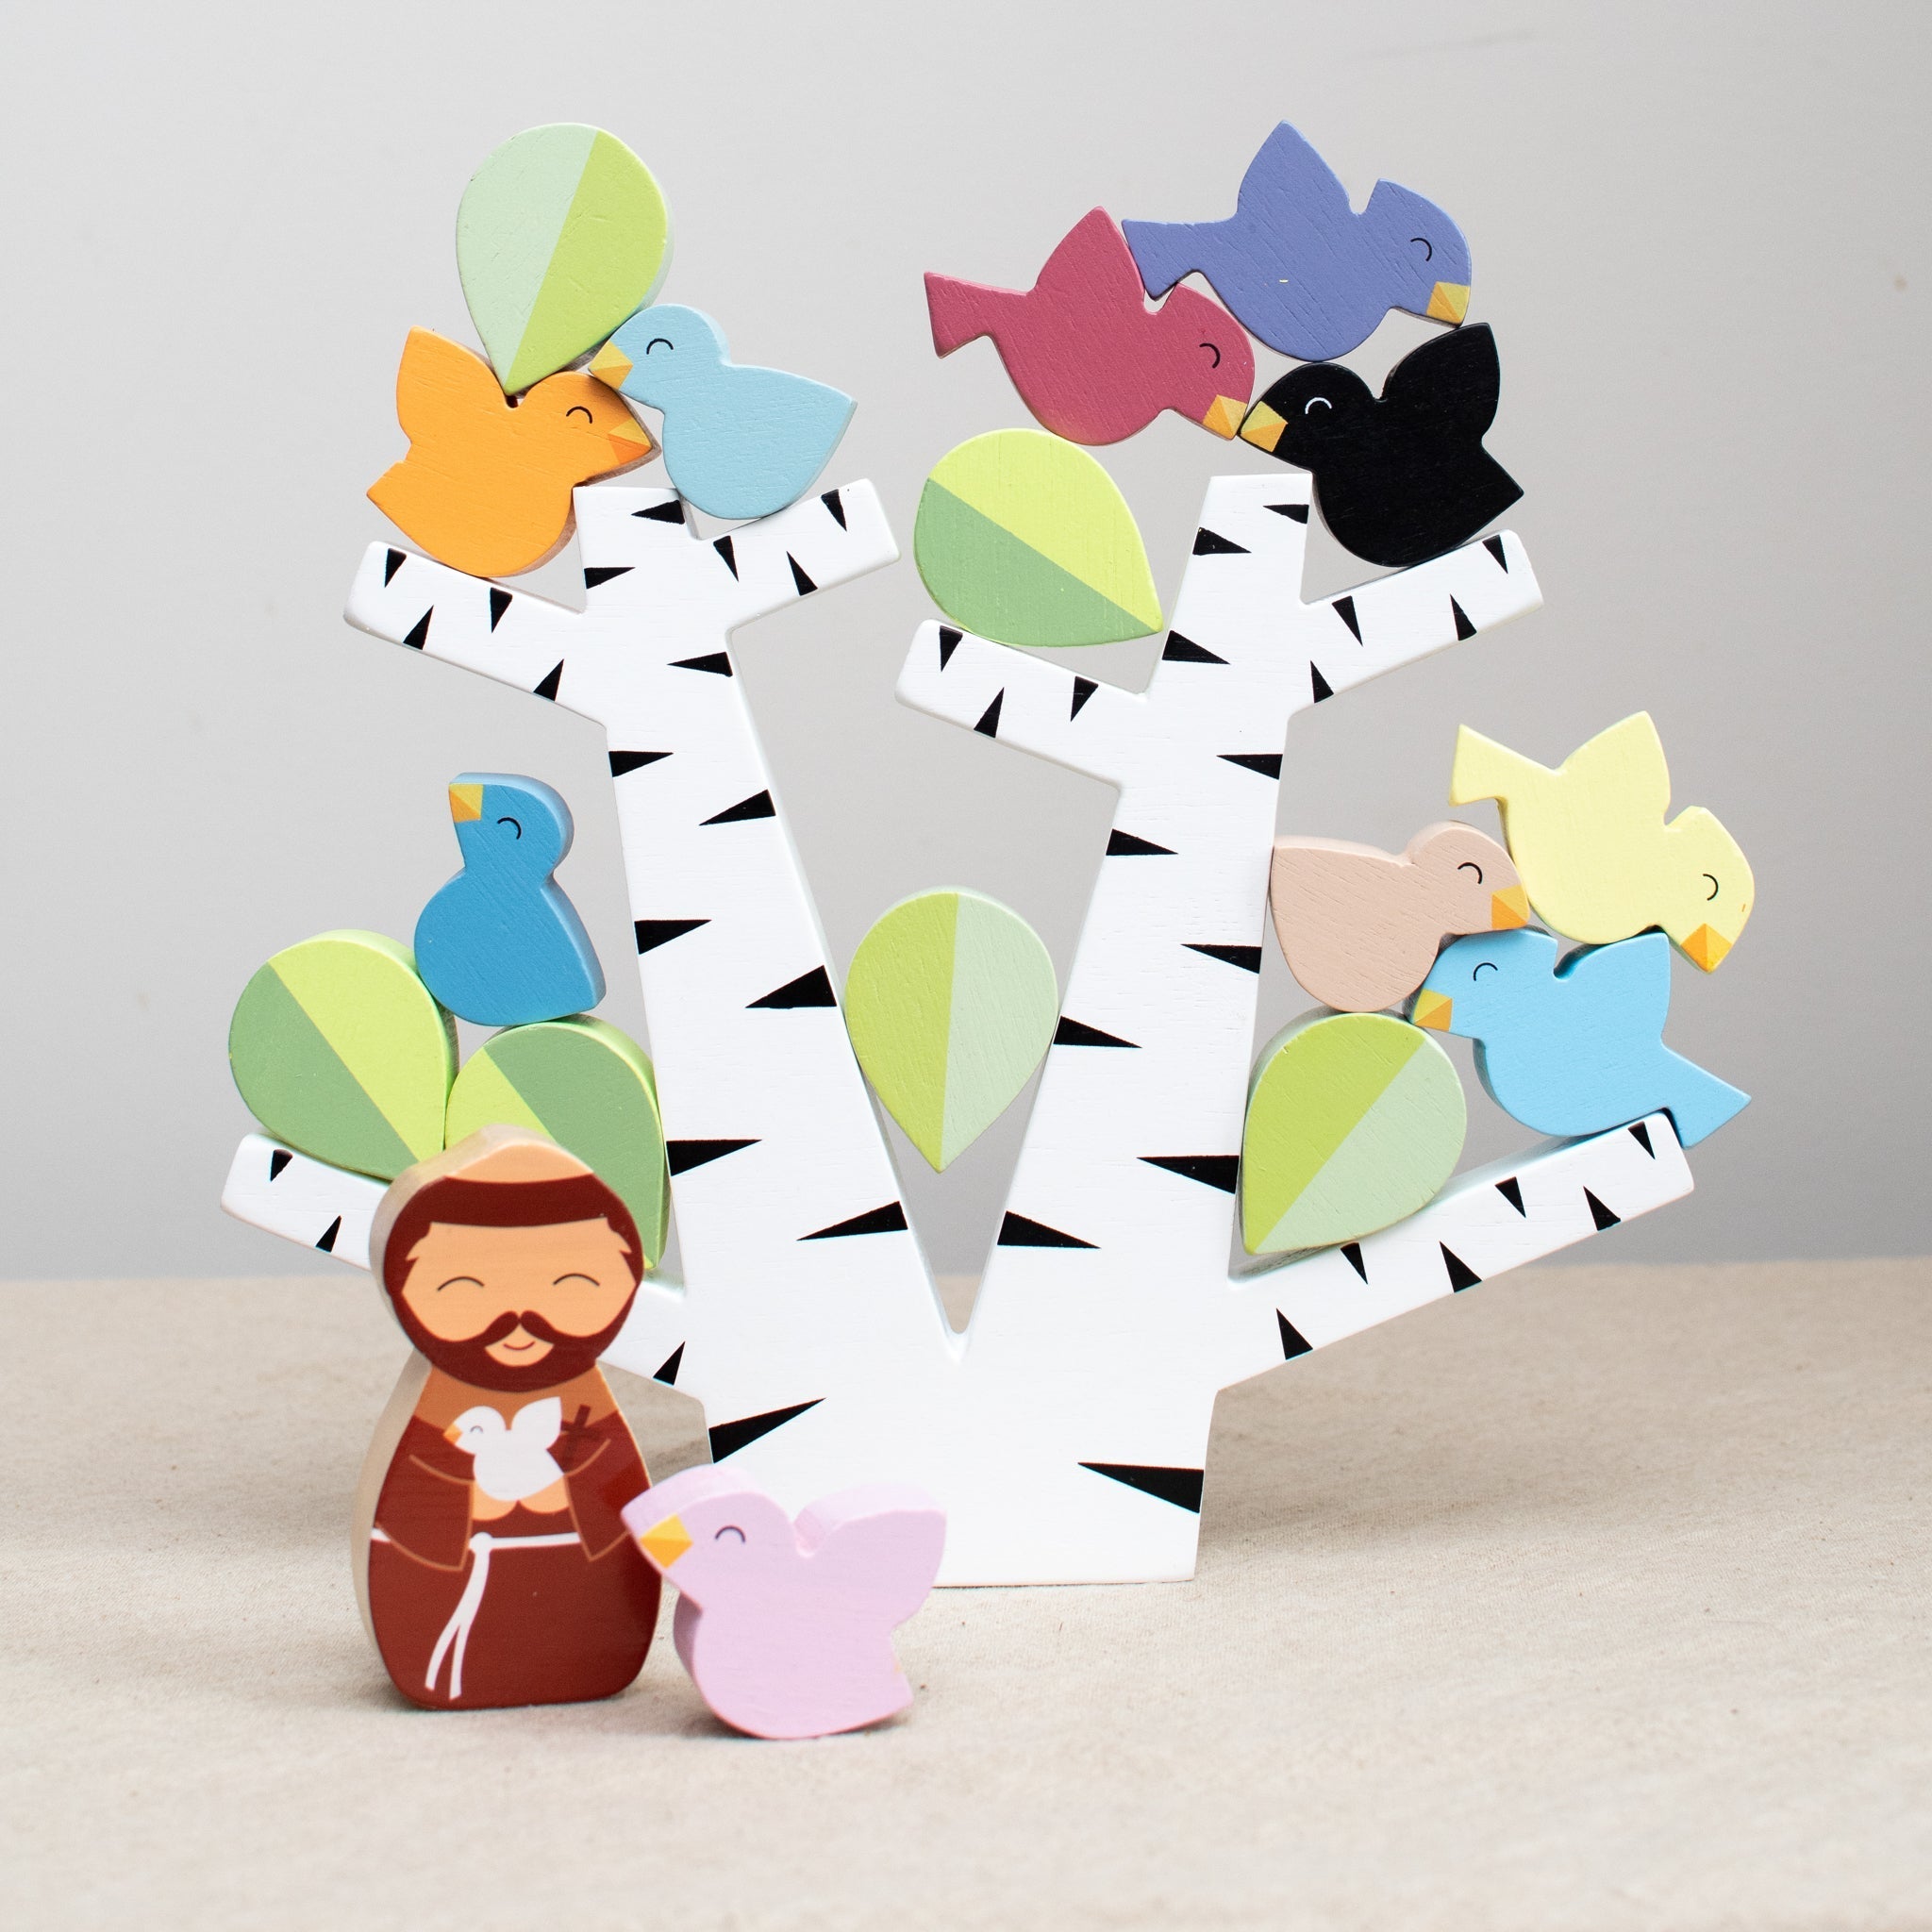 St. Francis Preaches To The Birds Wooden Stacking Toy - No Box